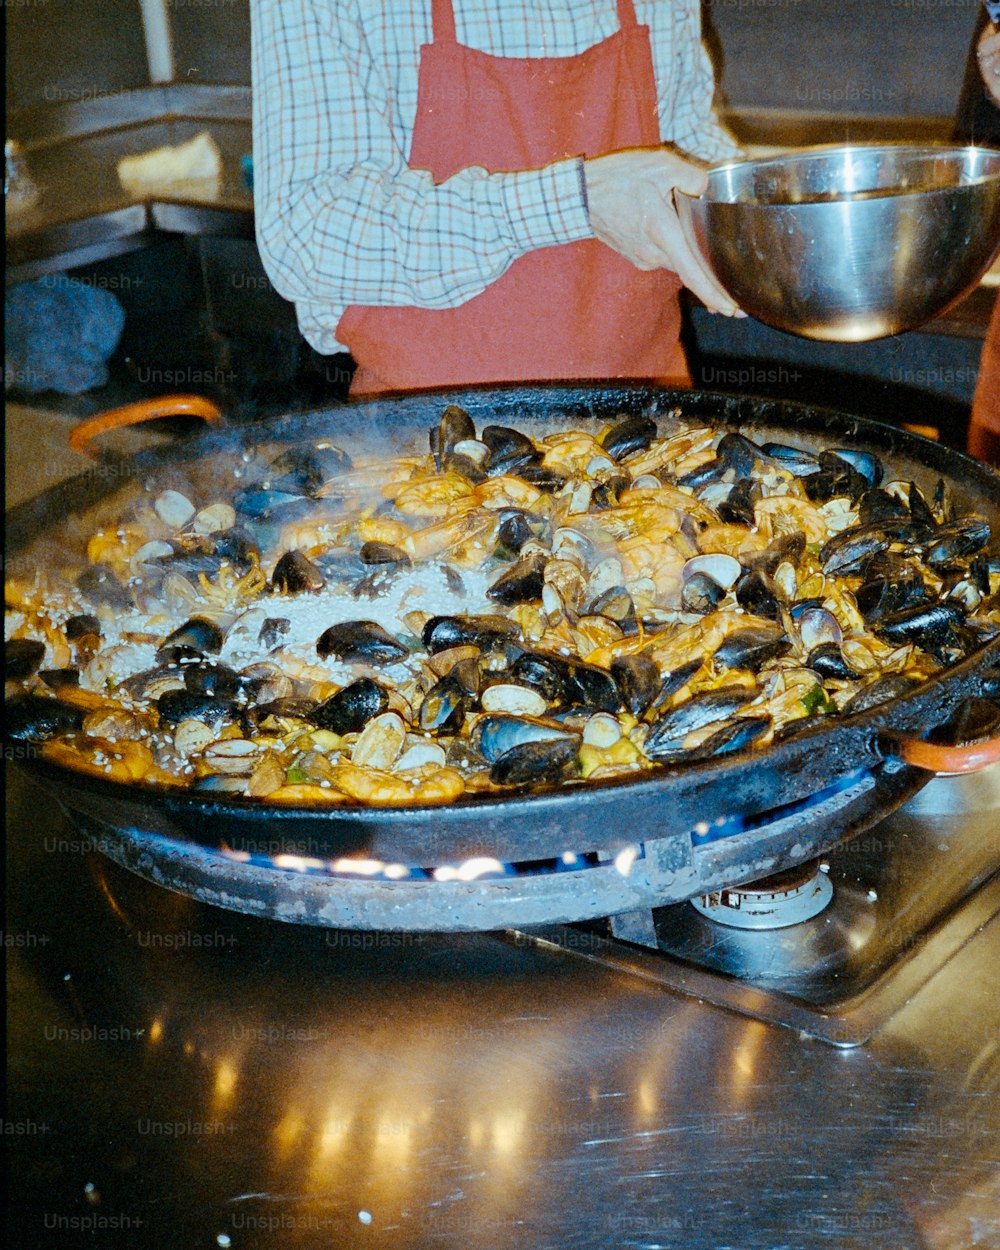 a pan of food is being cooked on a stove